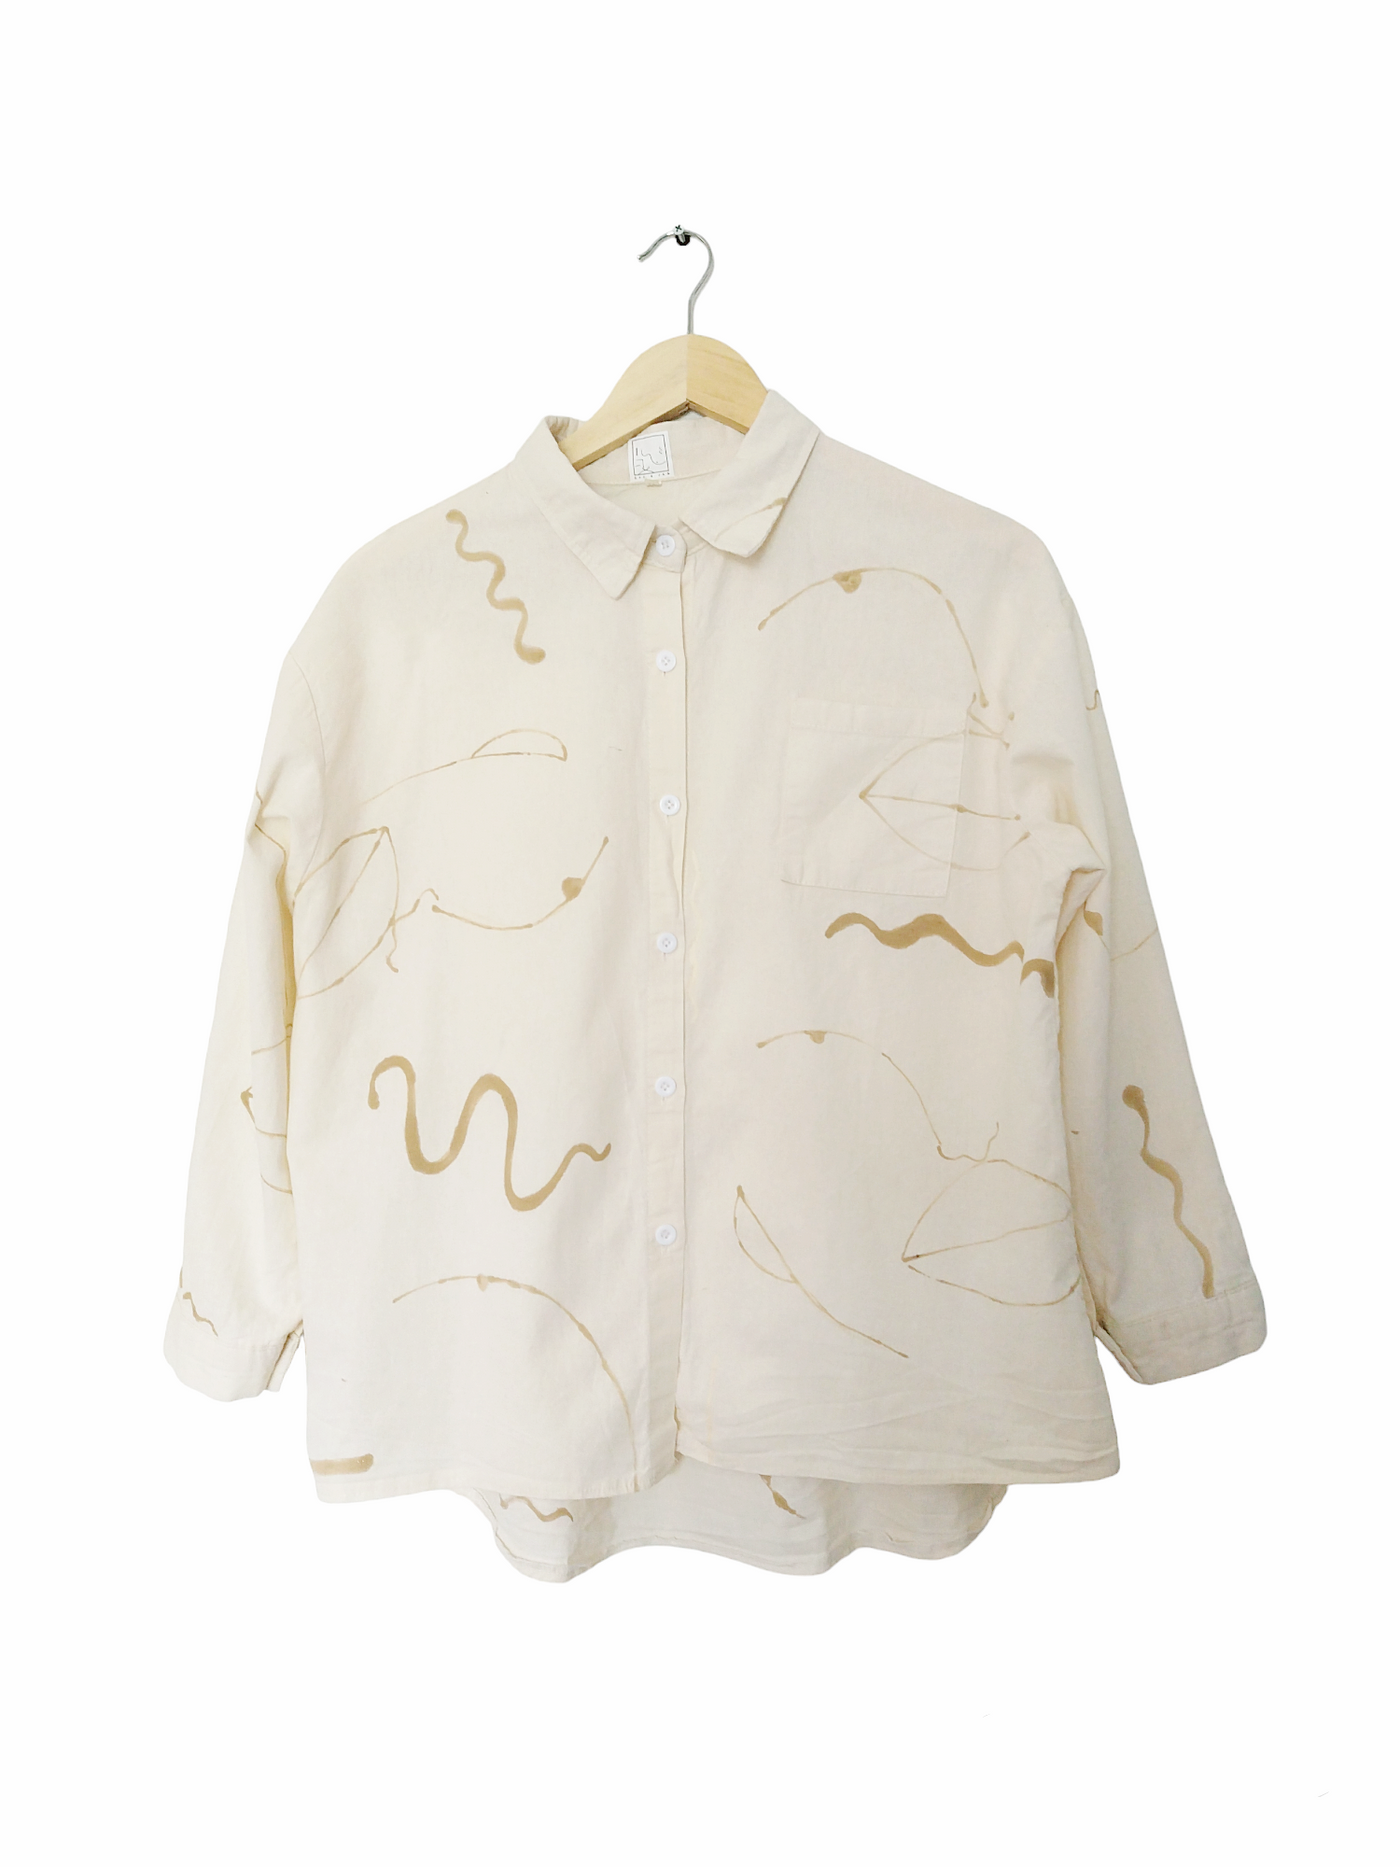 Aff & Jam Hand painted Ivory Pattern Shirt - Radical Giving